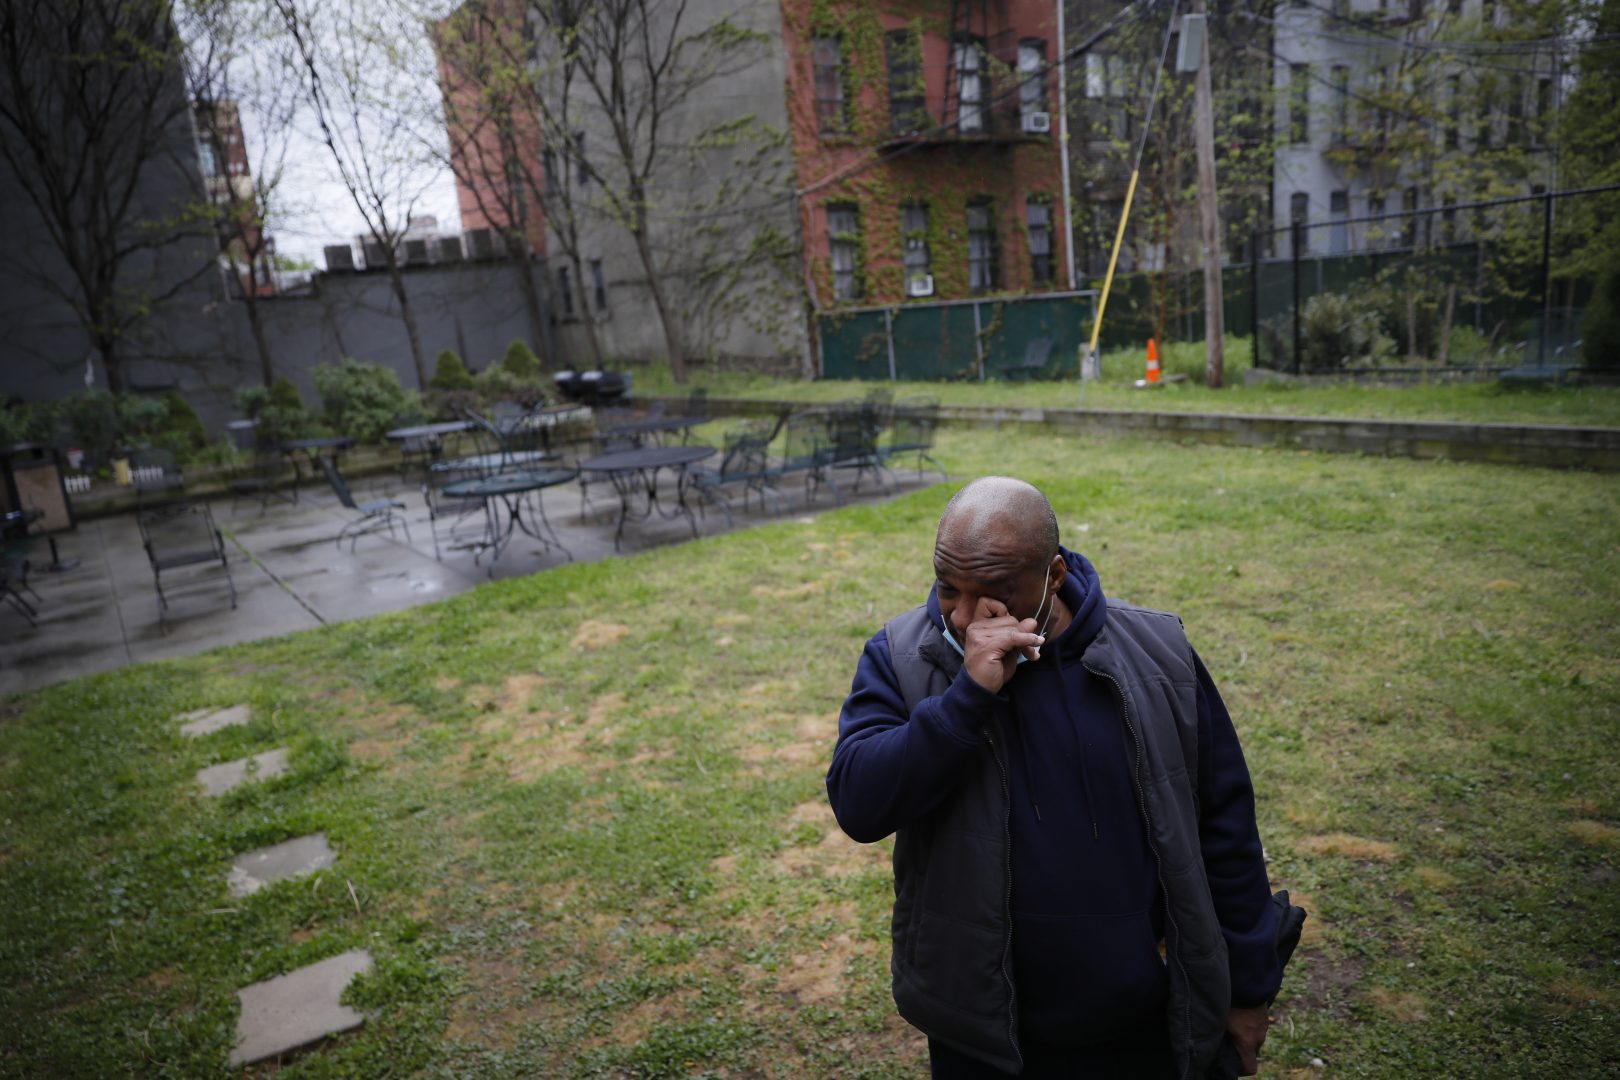 Milton I., 50, a resident living with schizophrenia at The Robert Meineker House, wipes his eyes as he speaks about the loneliness caused by social distancing in an empty common area, Wednesday, May 6, 2020, in the Brooklyn borough of New York. Even before the pandemic, access to mental health services in the U.S. could be difficult, including for people with insurance. Now experts fear COVID-19 will make the situation worse.